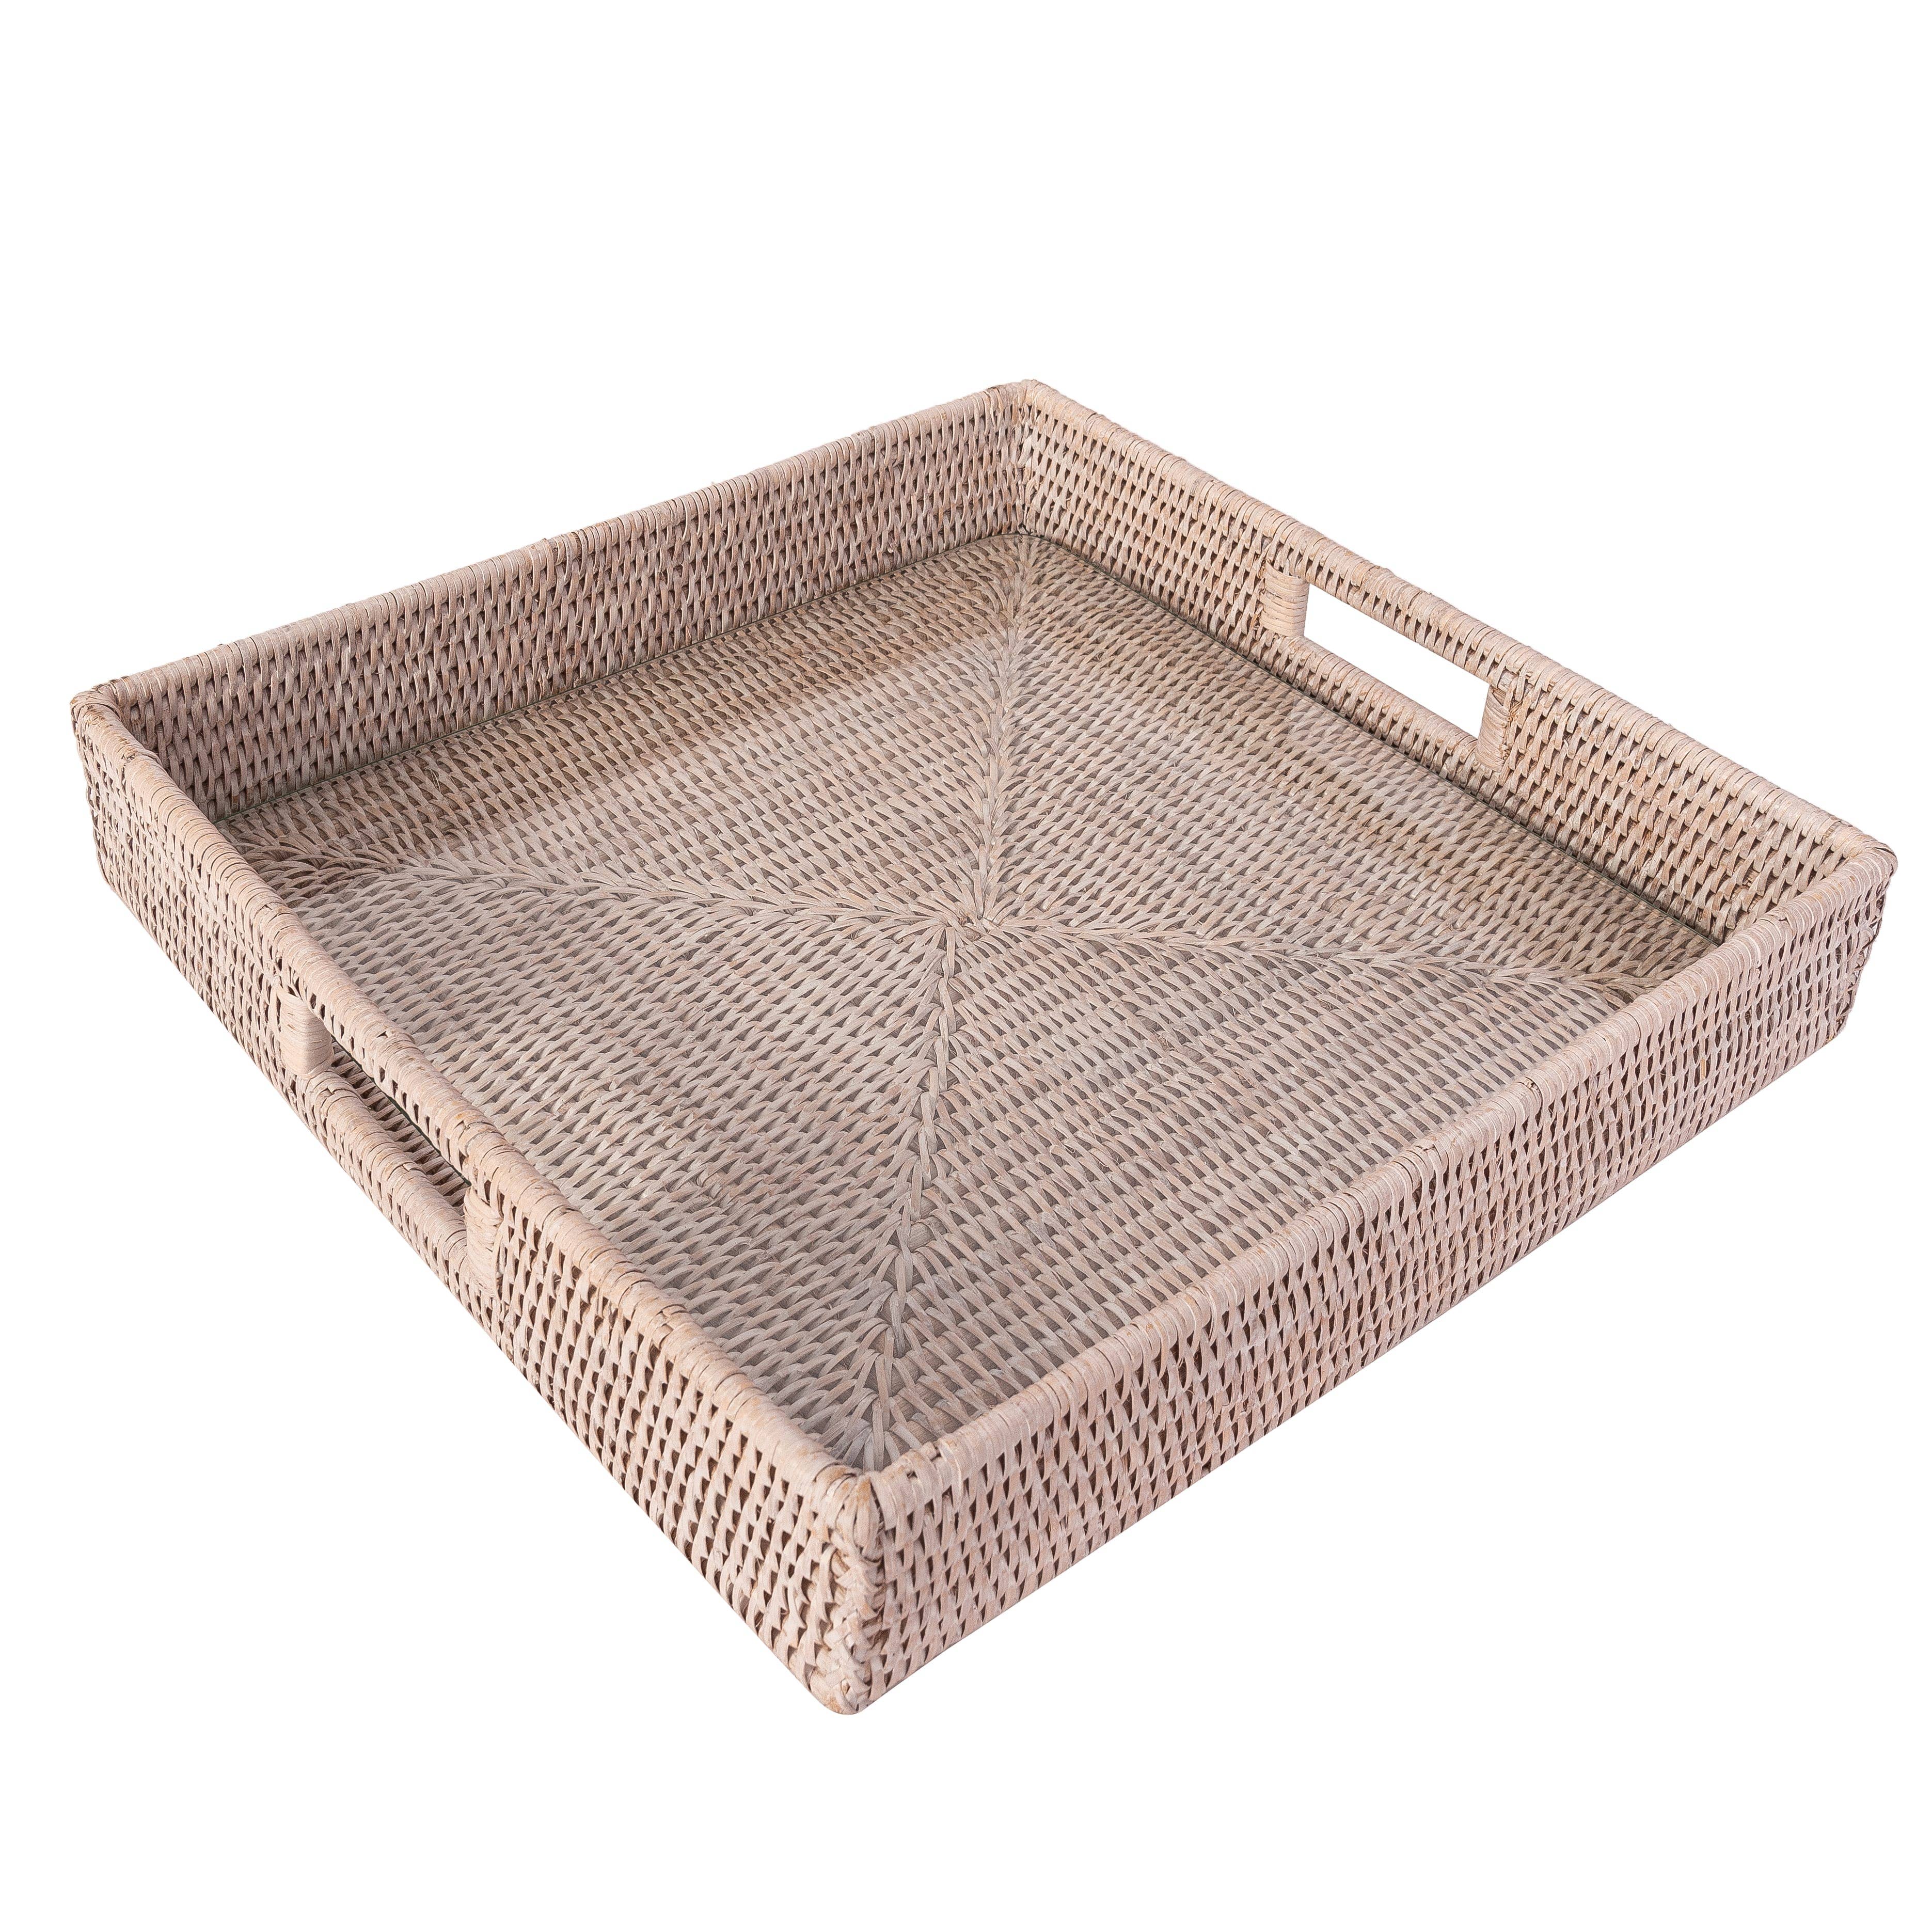 16" Rattan Square Serving Ottoman Tray with Glass Insert:  White Wash